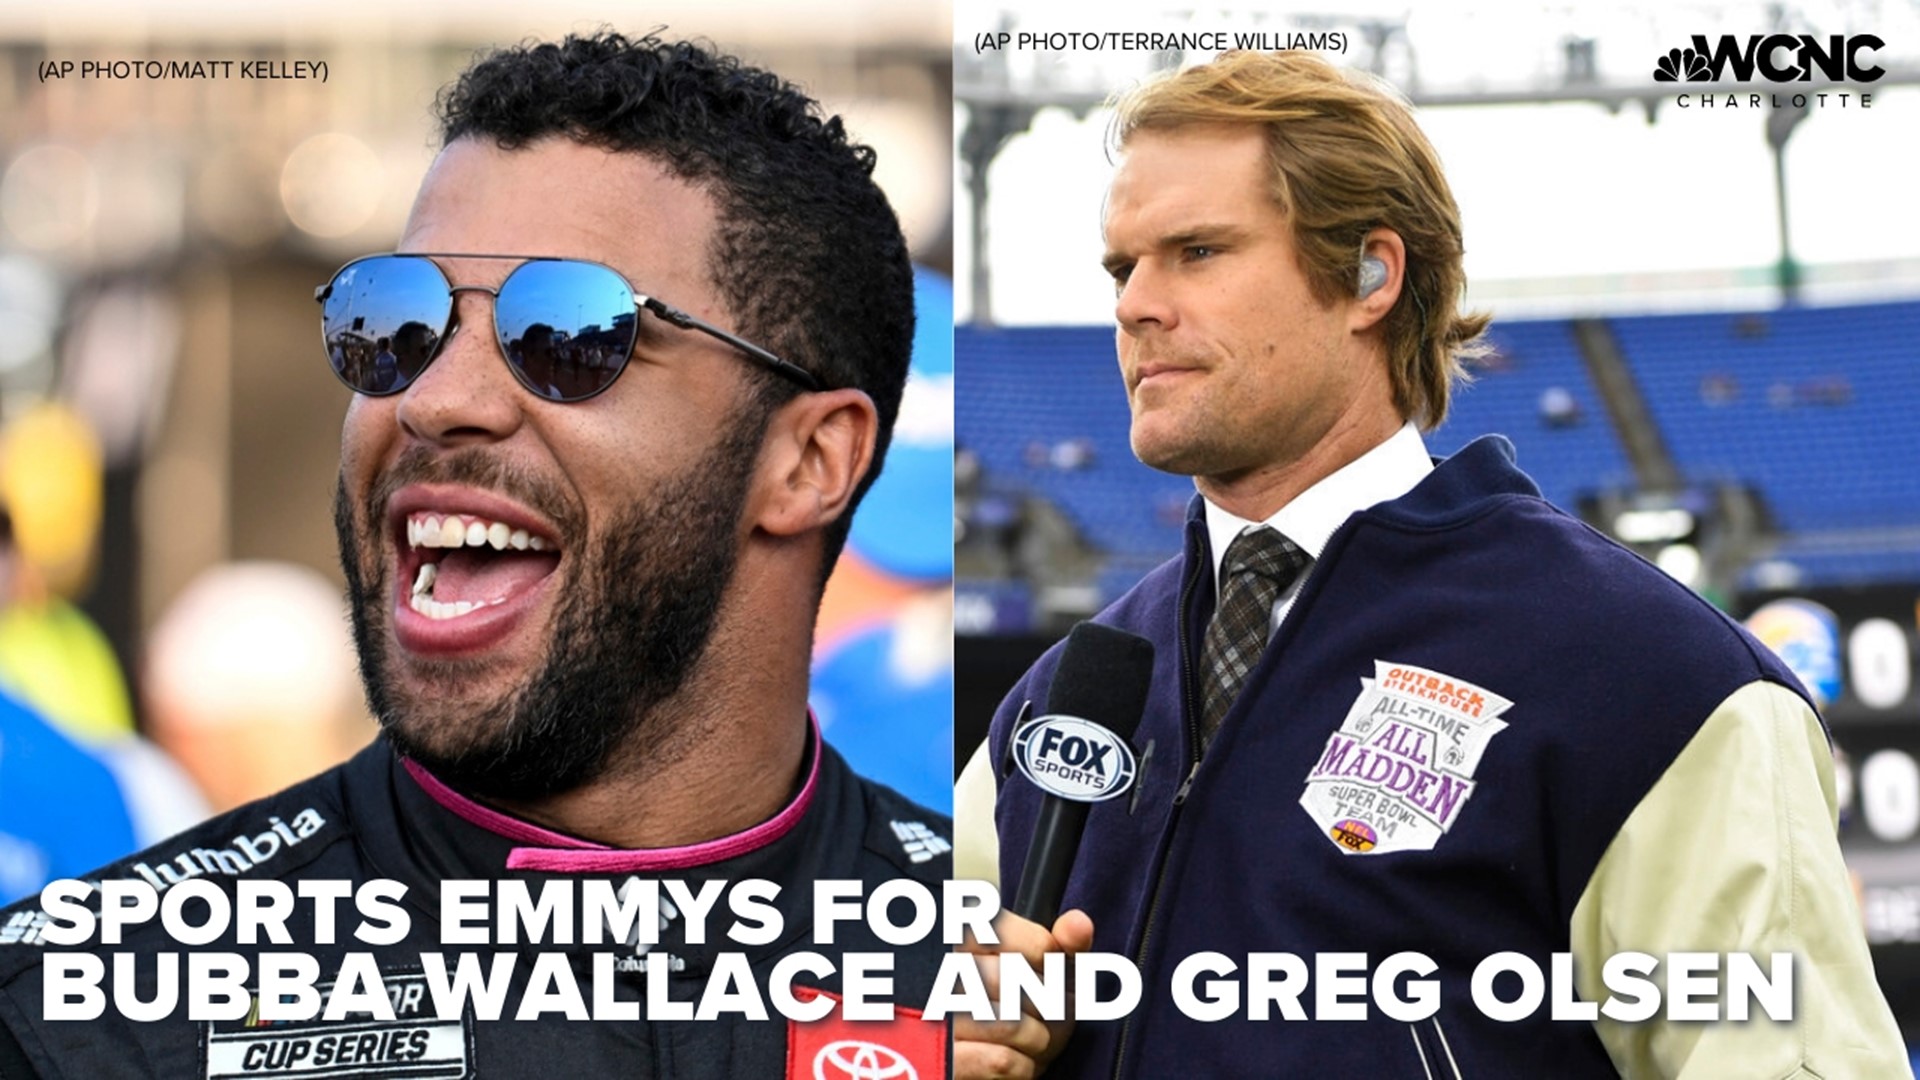 Bubba Wallace and Greg Olsen have both won 
a sports Emmy.